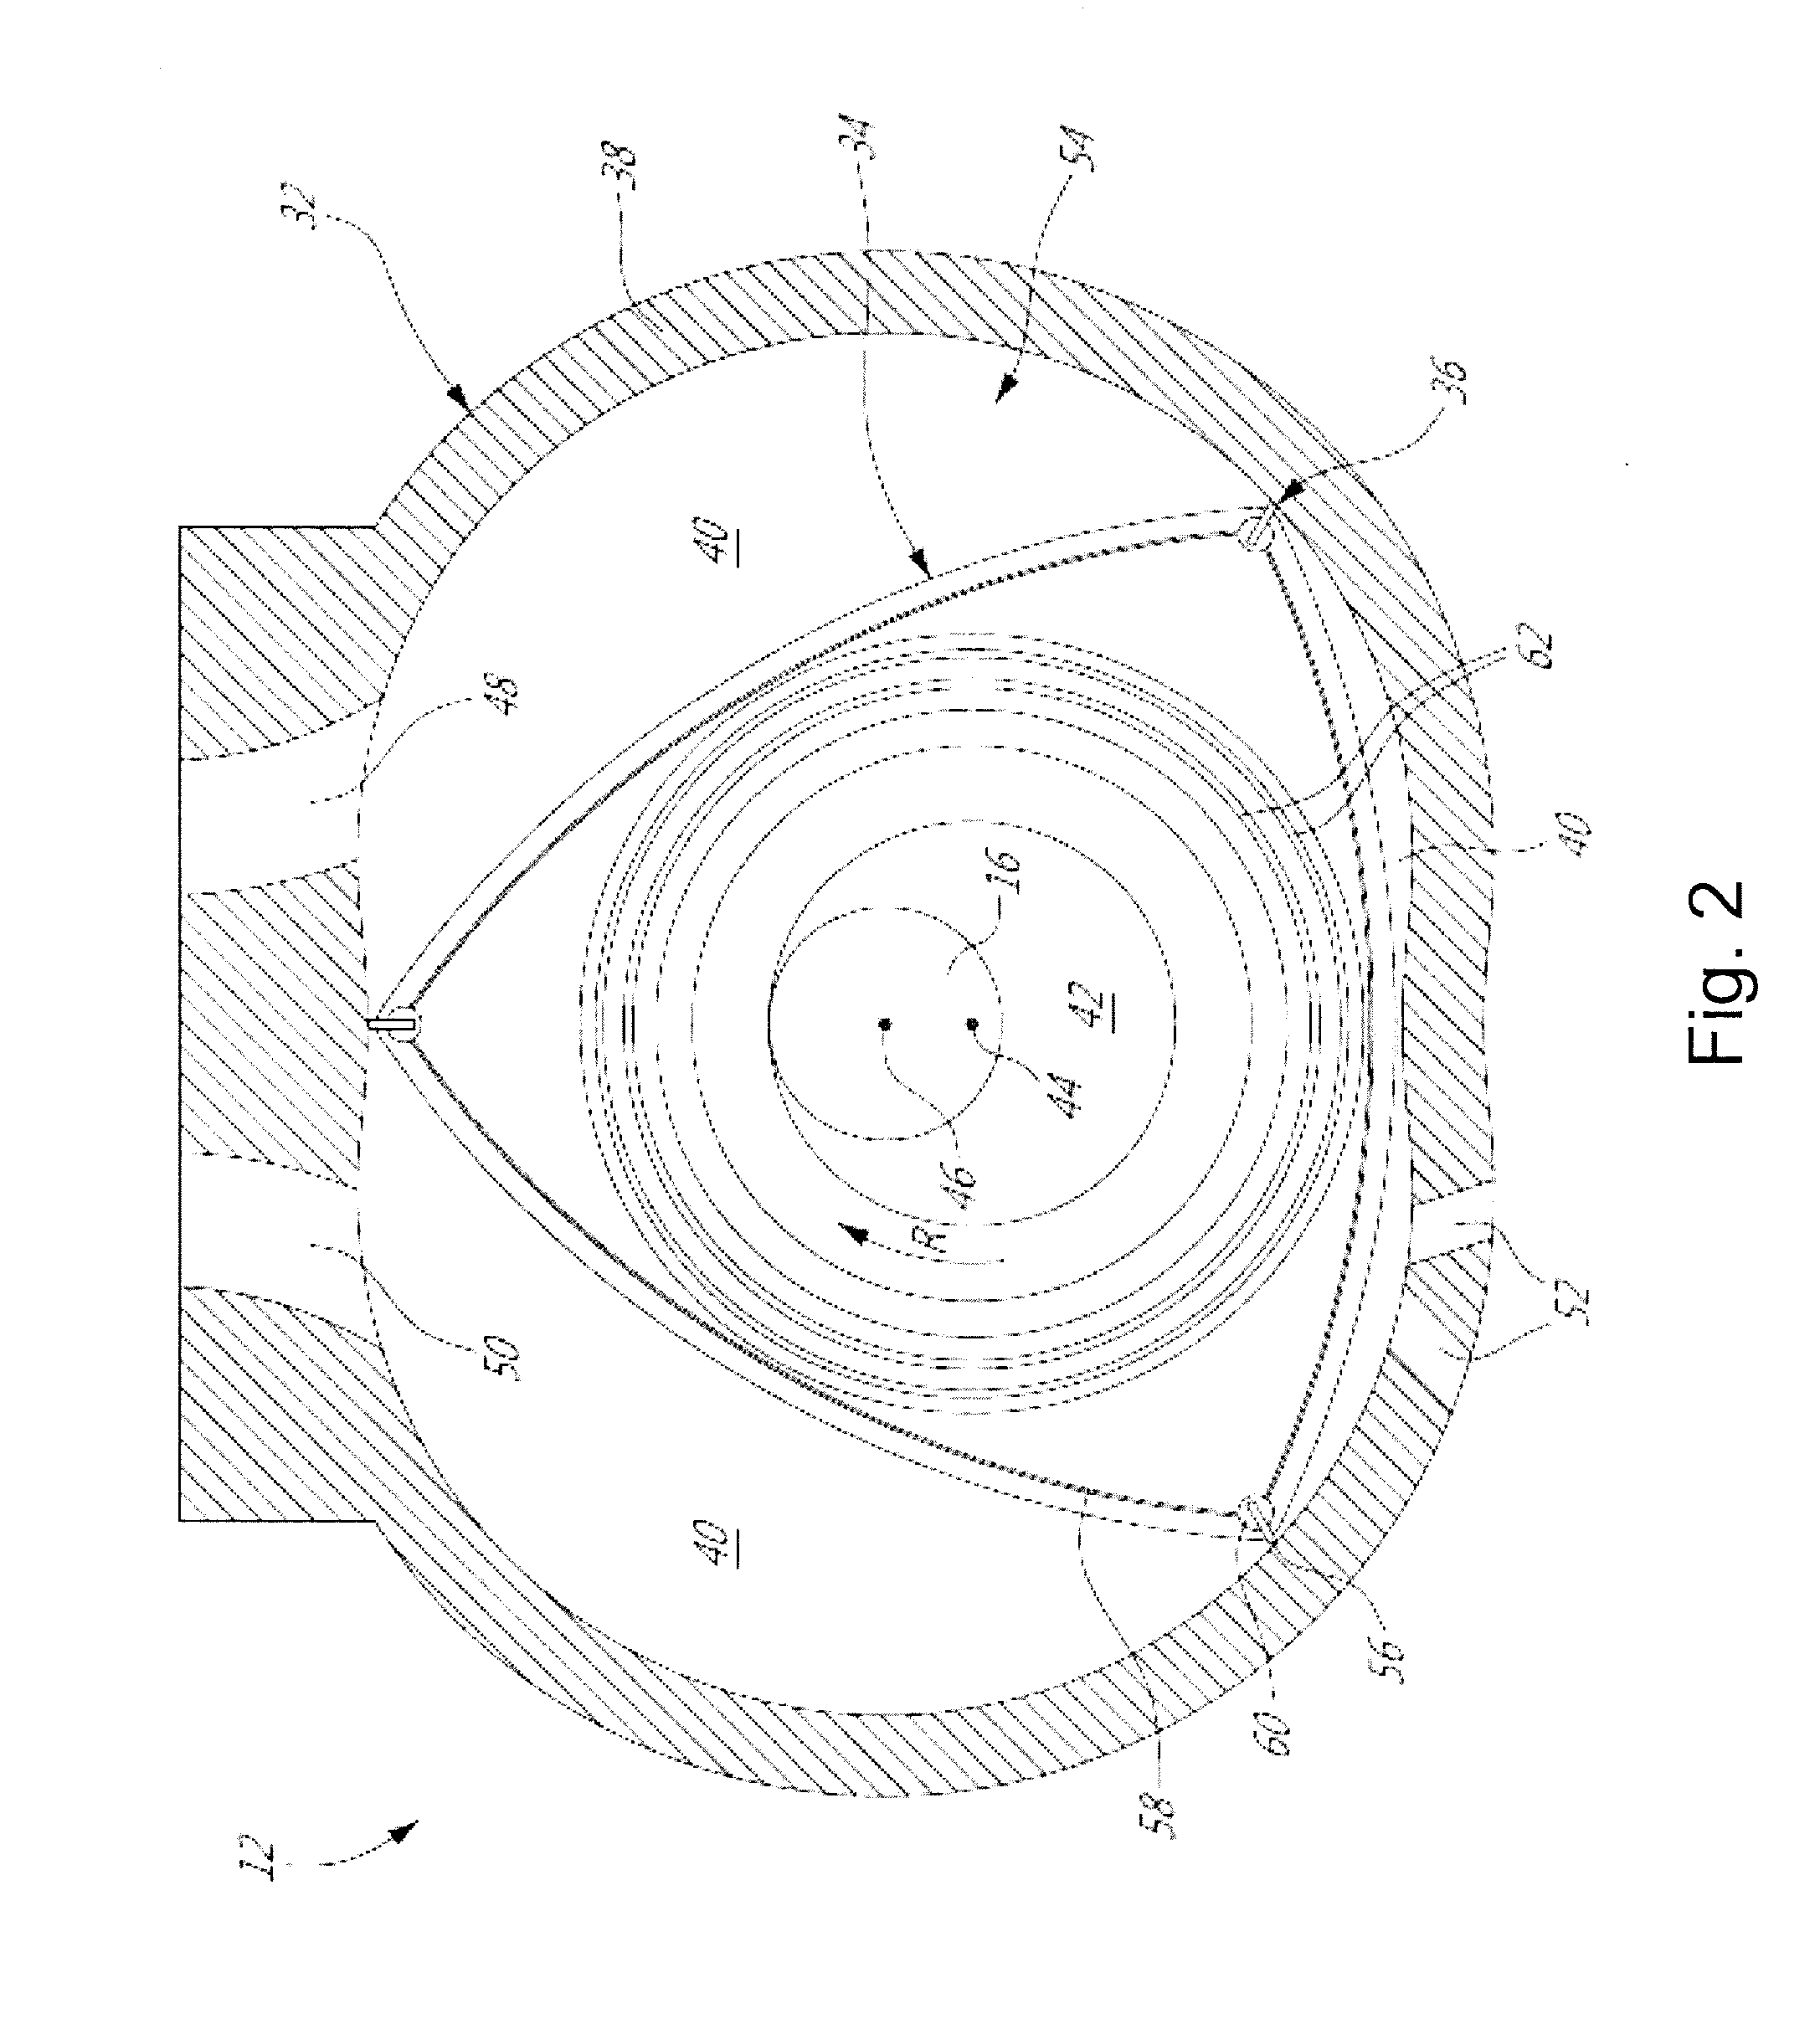 Turboprop engine assembly with combined engine and cooling exhaust